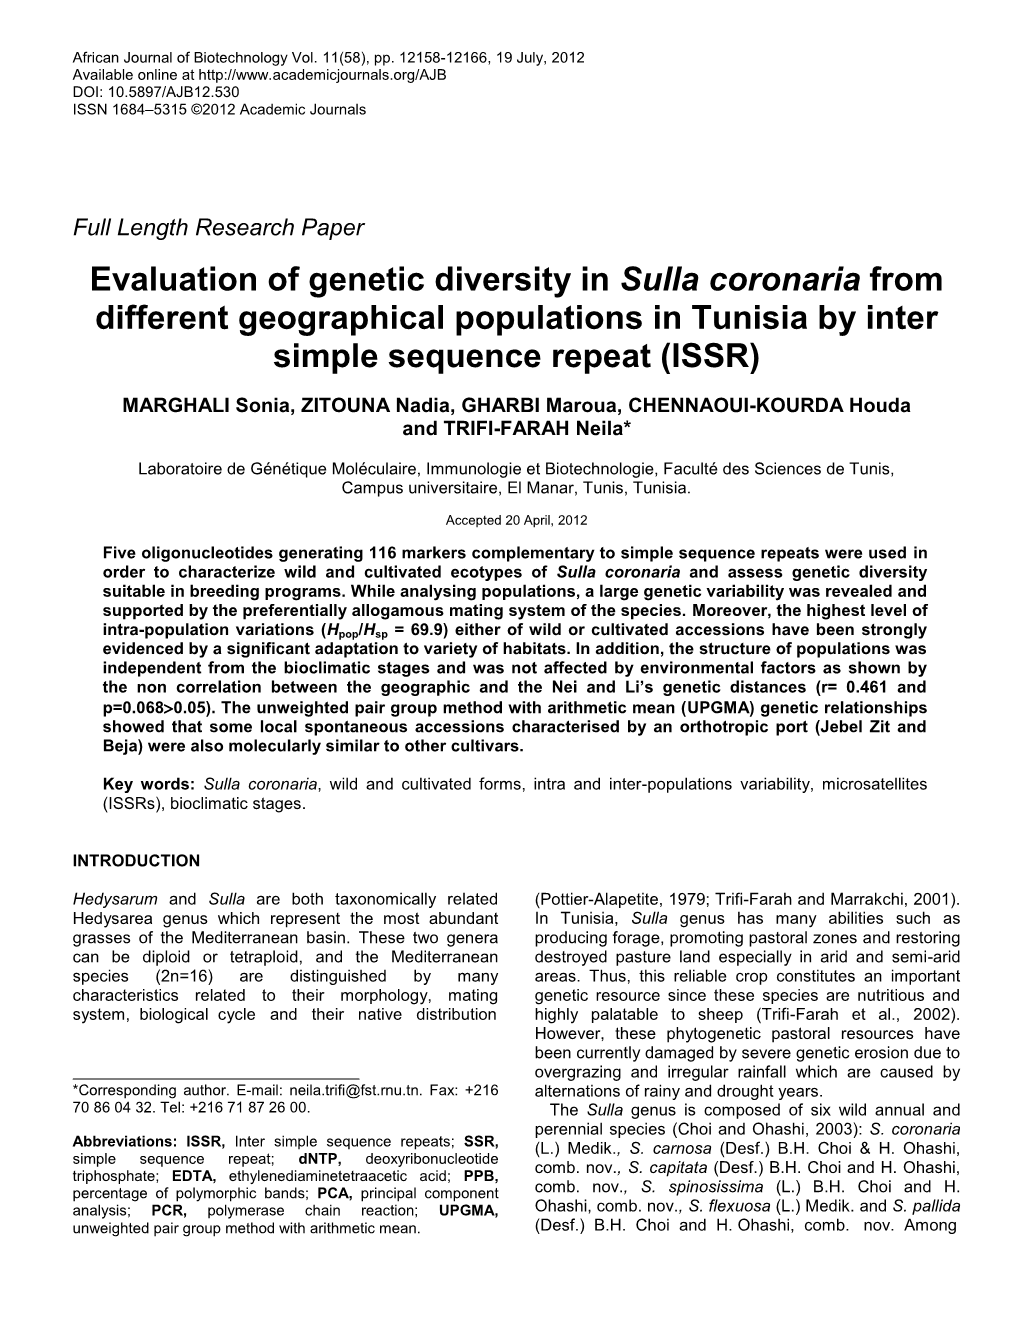 Evaluation of Genetic Diversity in Sulla Coronaria from Different Geographical Populations in Tunisia by Inter Simple Sequence Repeat (ISSR)